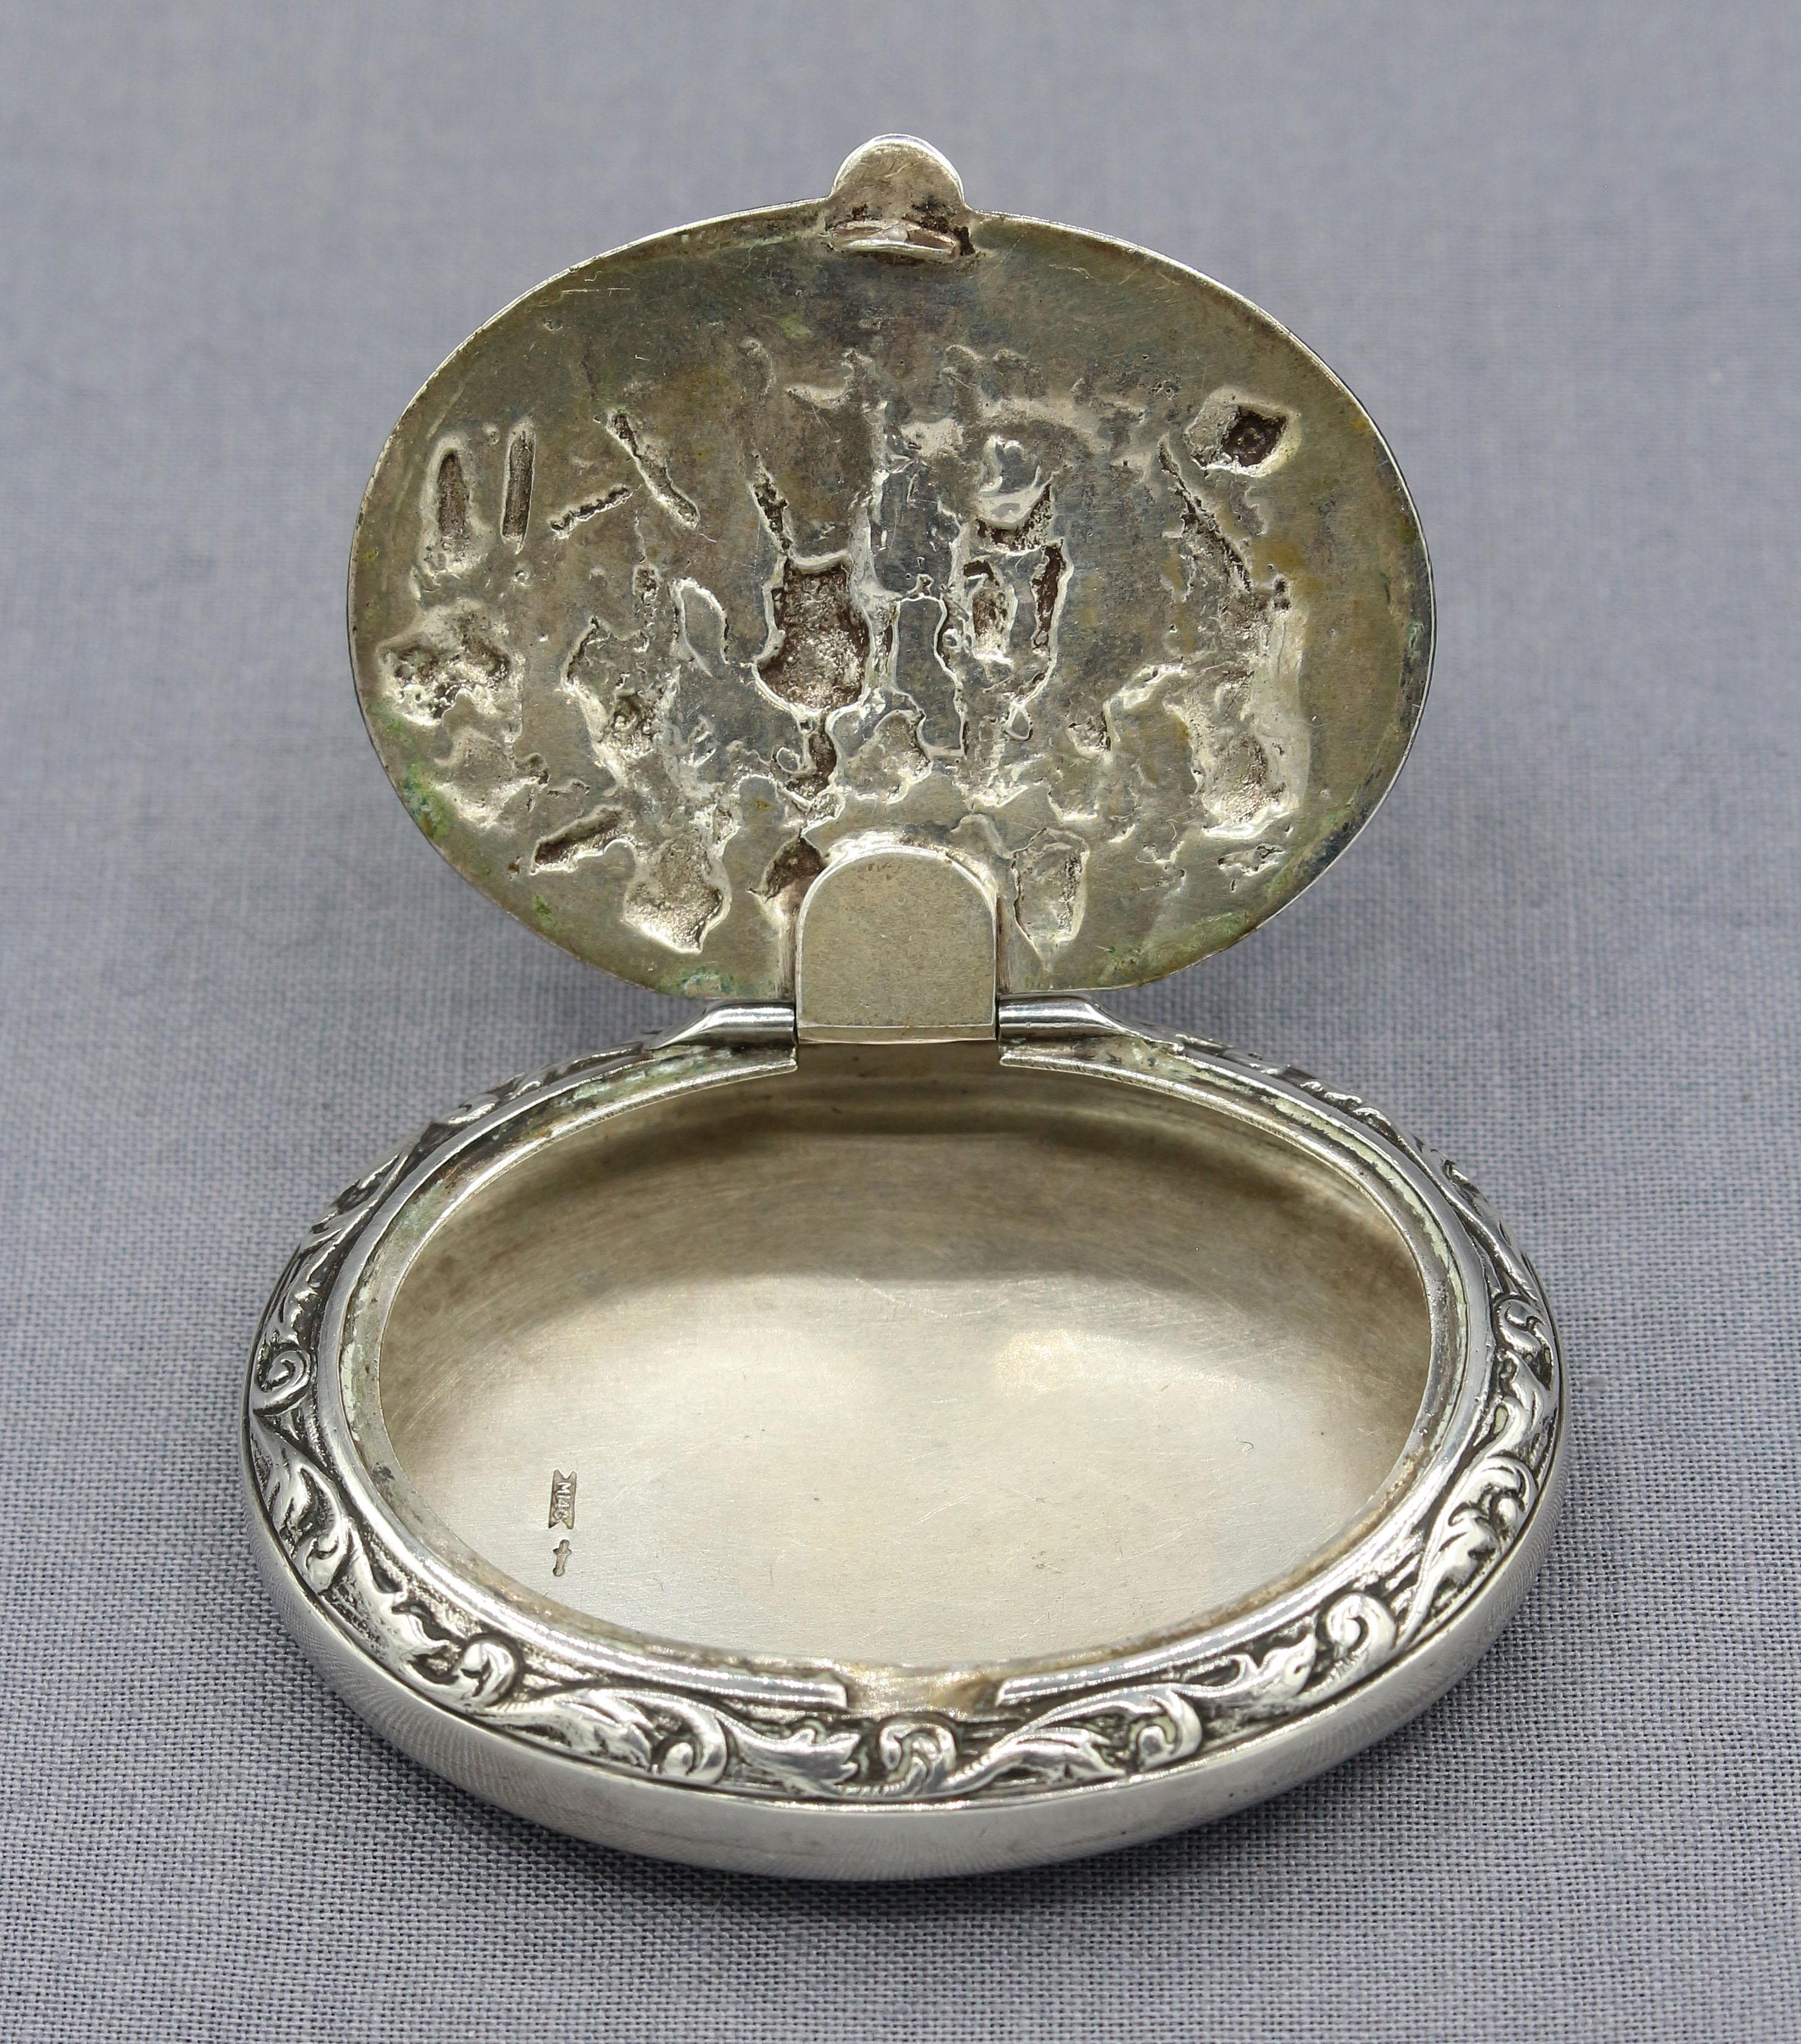 Continental silver oval pill box, Netherlands, c.1900. Decorated with a group of Renaissance figures. 833 silver standard. 0.85 troy oz.
2 1/8